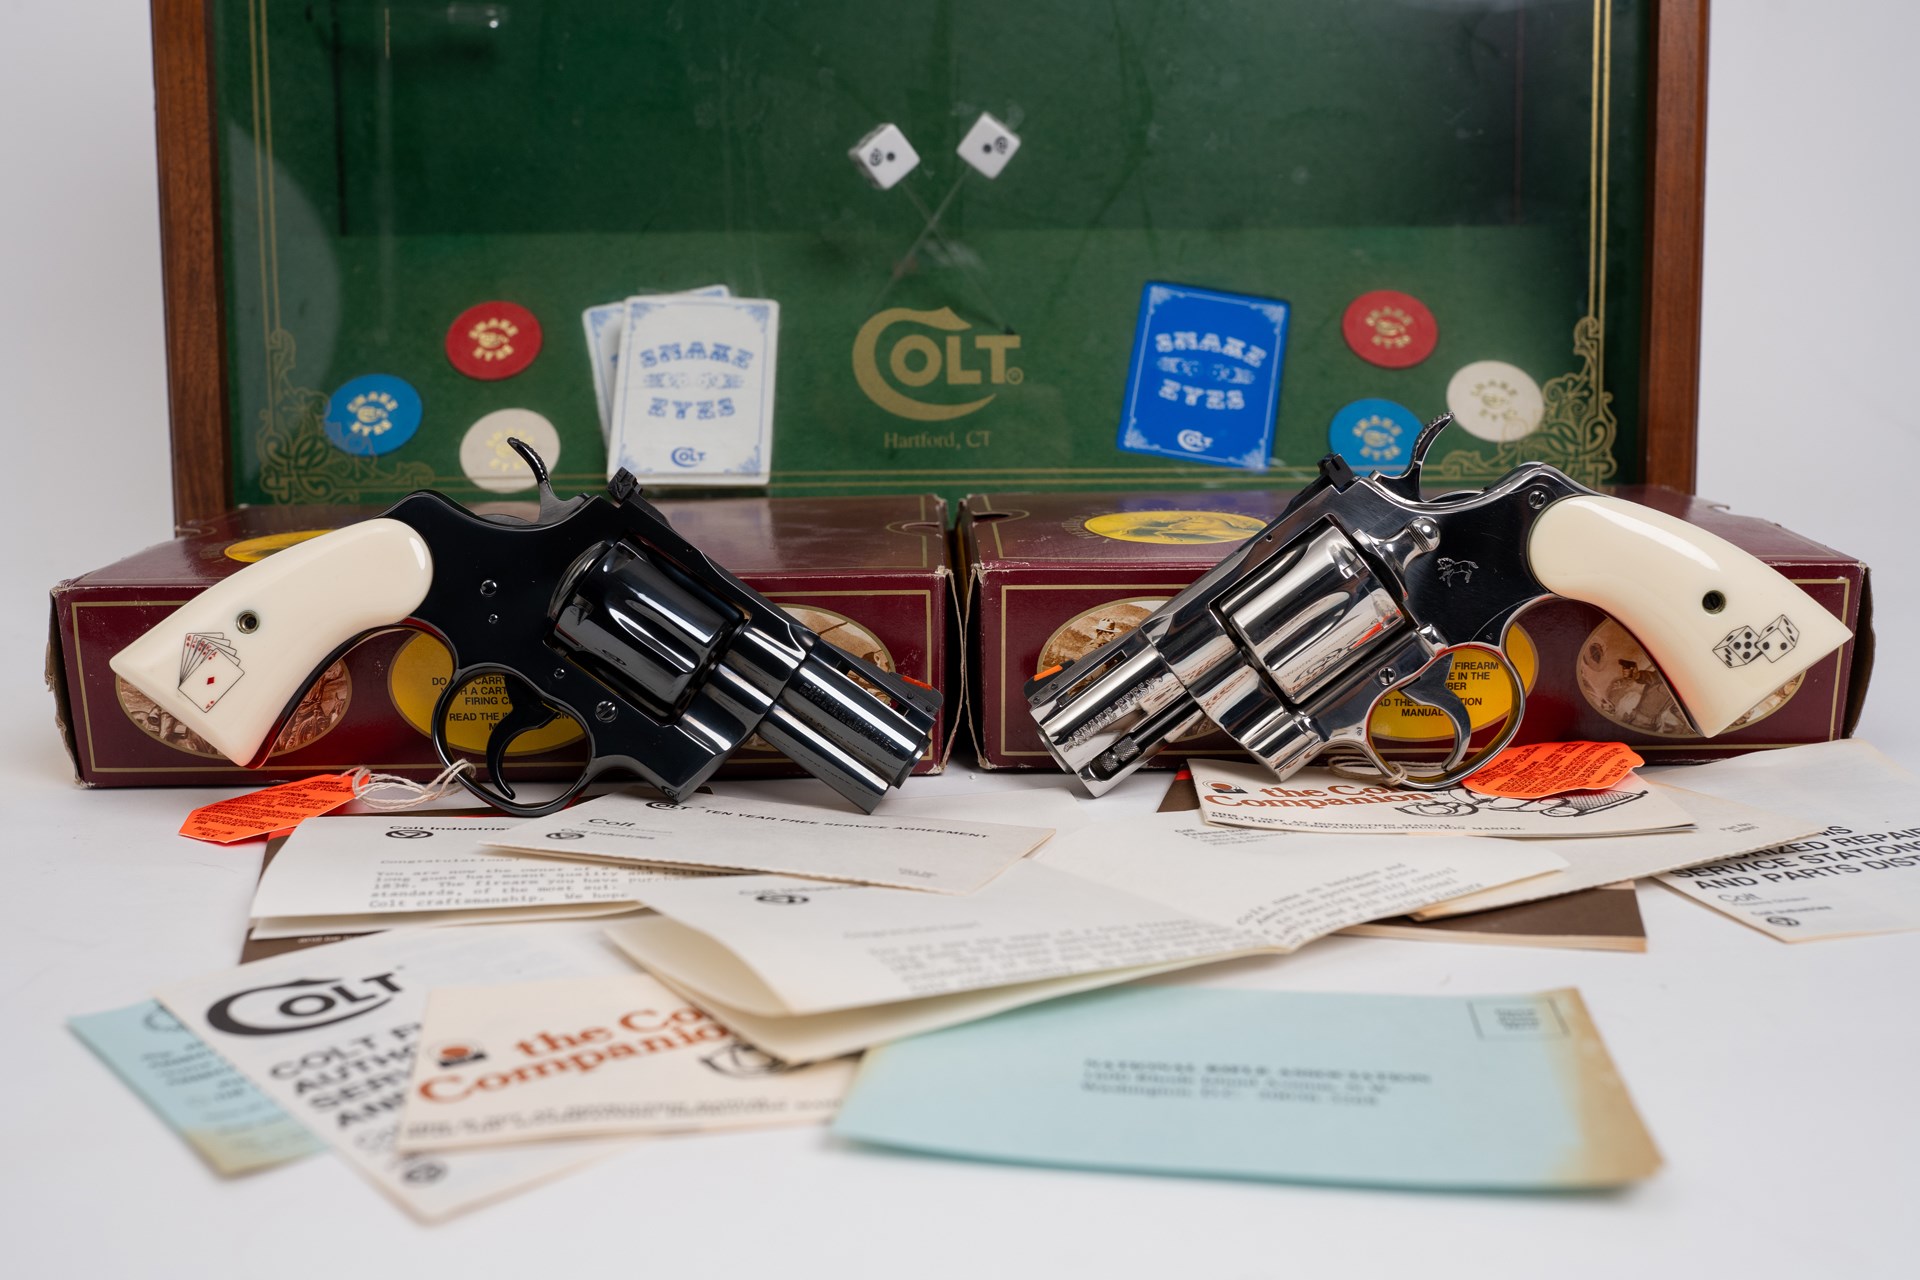 This rare matched pair of Colt Python Snake Eyes .357 Magnum 2.5” Double Action Revolvers is one of only 500 sets that were issued in 1989. The set is complete with its original display case and box.